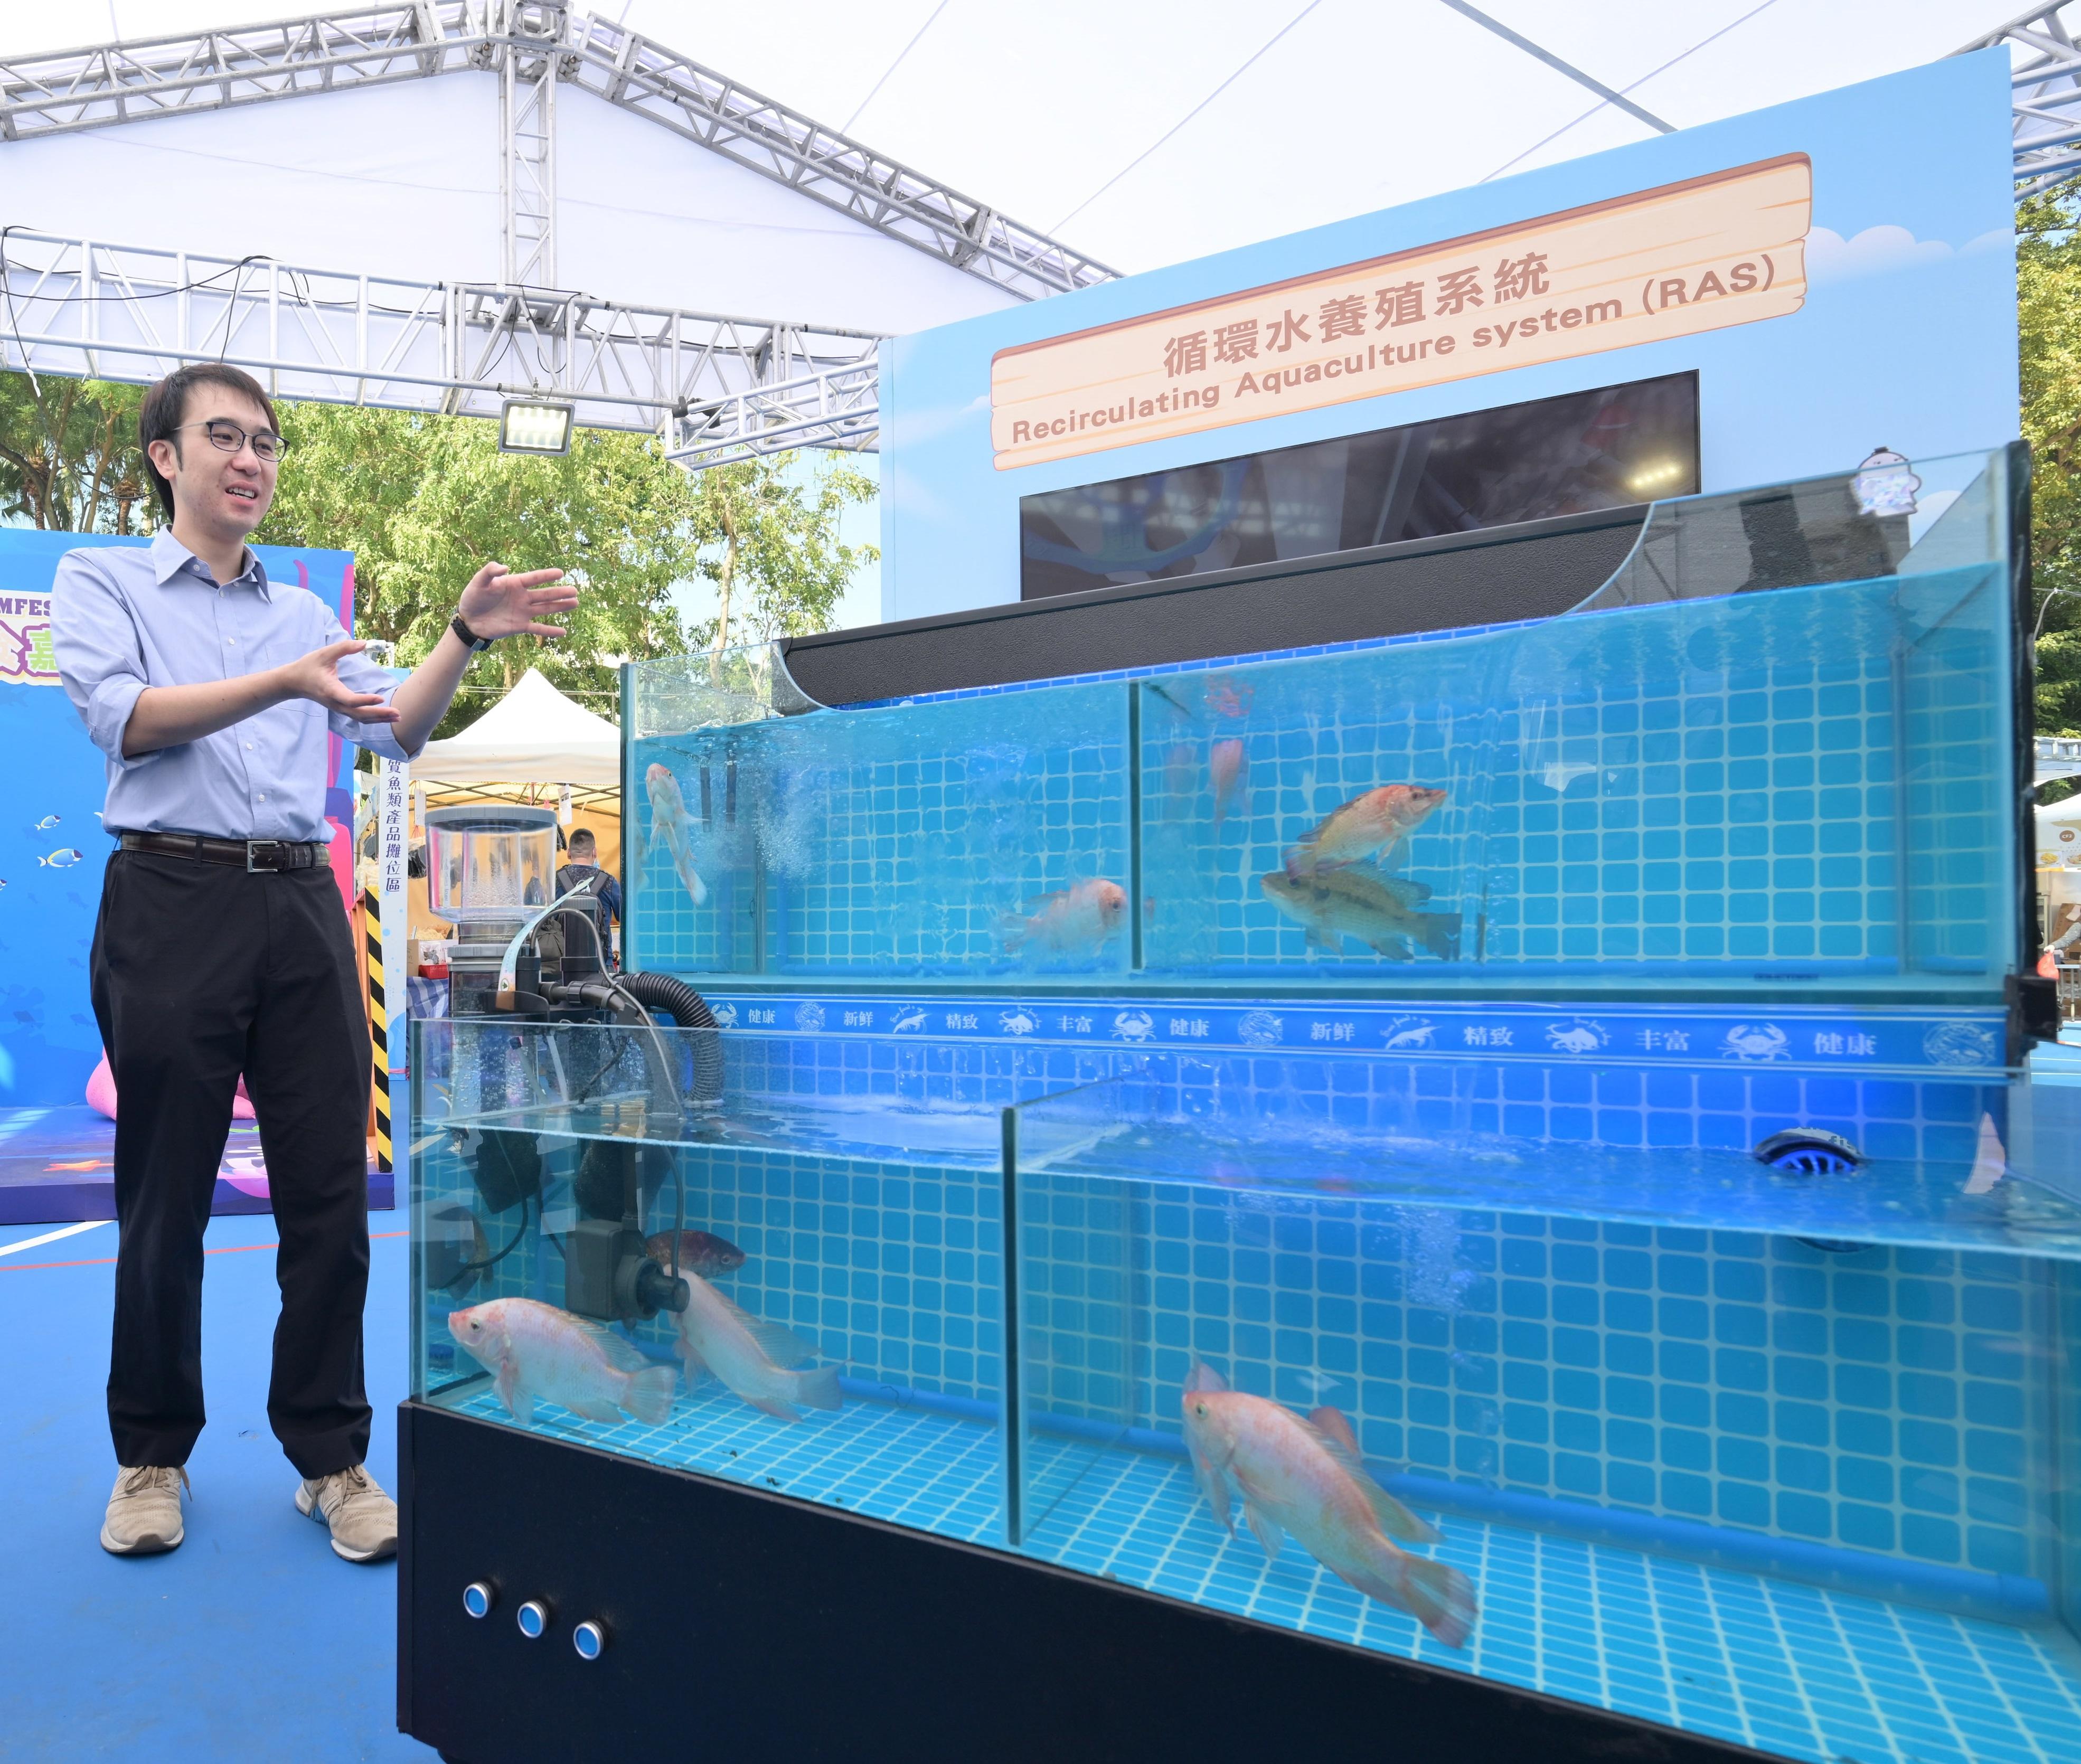 FarmFest 2024 runs for three consecutive days between today (January 5) and January 7 at Fa Hui Park in Mong Kok to showcase a variety of local agricultural and fisheries products and other goods. Photo shows the Fisheries Officer (Aquaculture Projects) of the Agriculture, Fisheries and Conservation Department, Dr Peter Luk, introducing the recirculating aquaculture system in the fisheries zone.